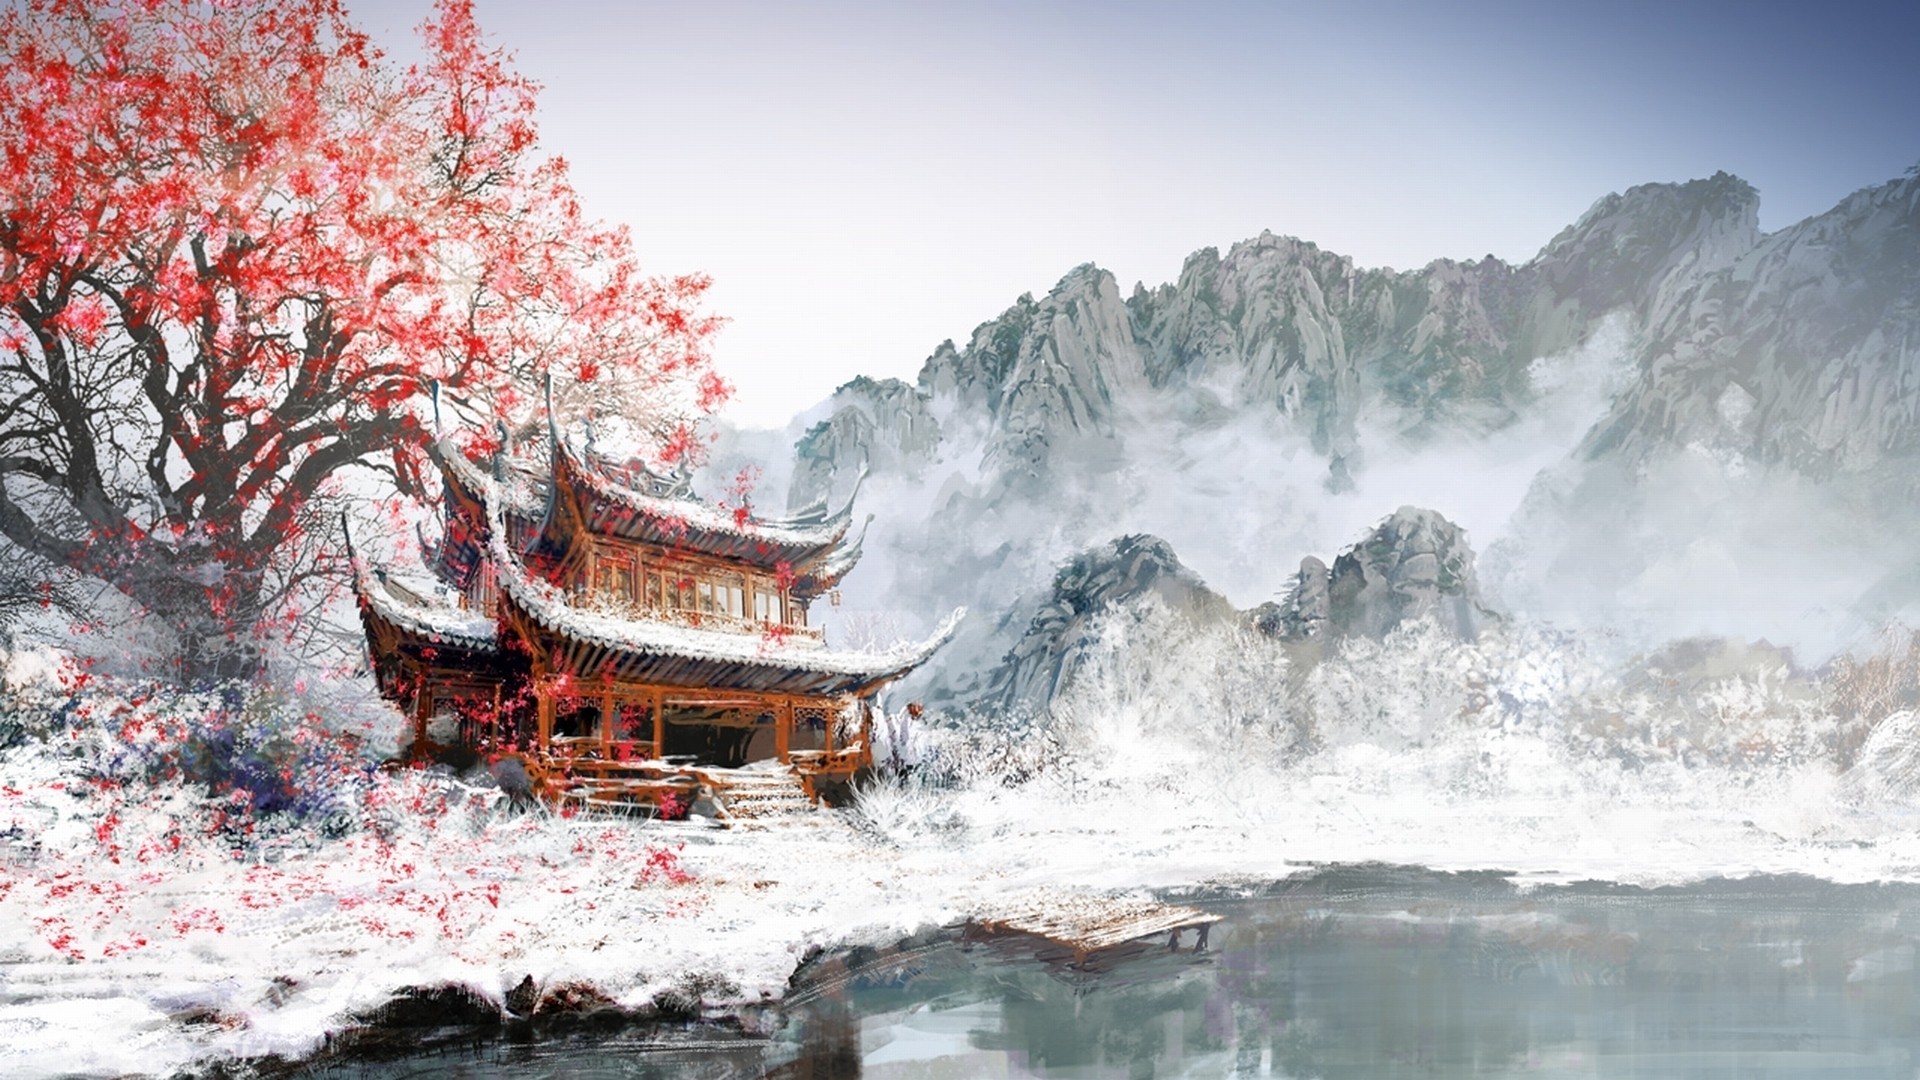 General 1920x1080 painting Japan winter white snow mountains cherry blossom fantasy art ice cold Asia nature